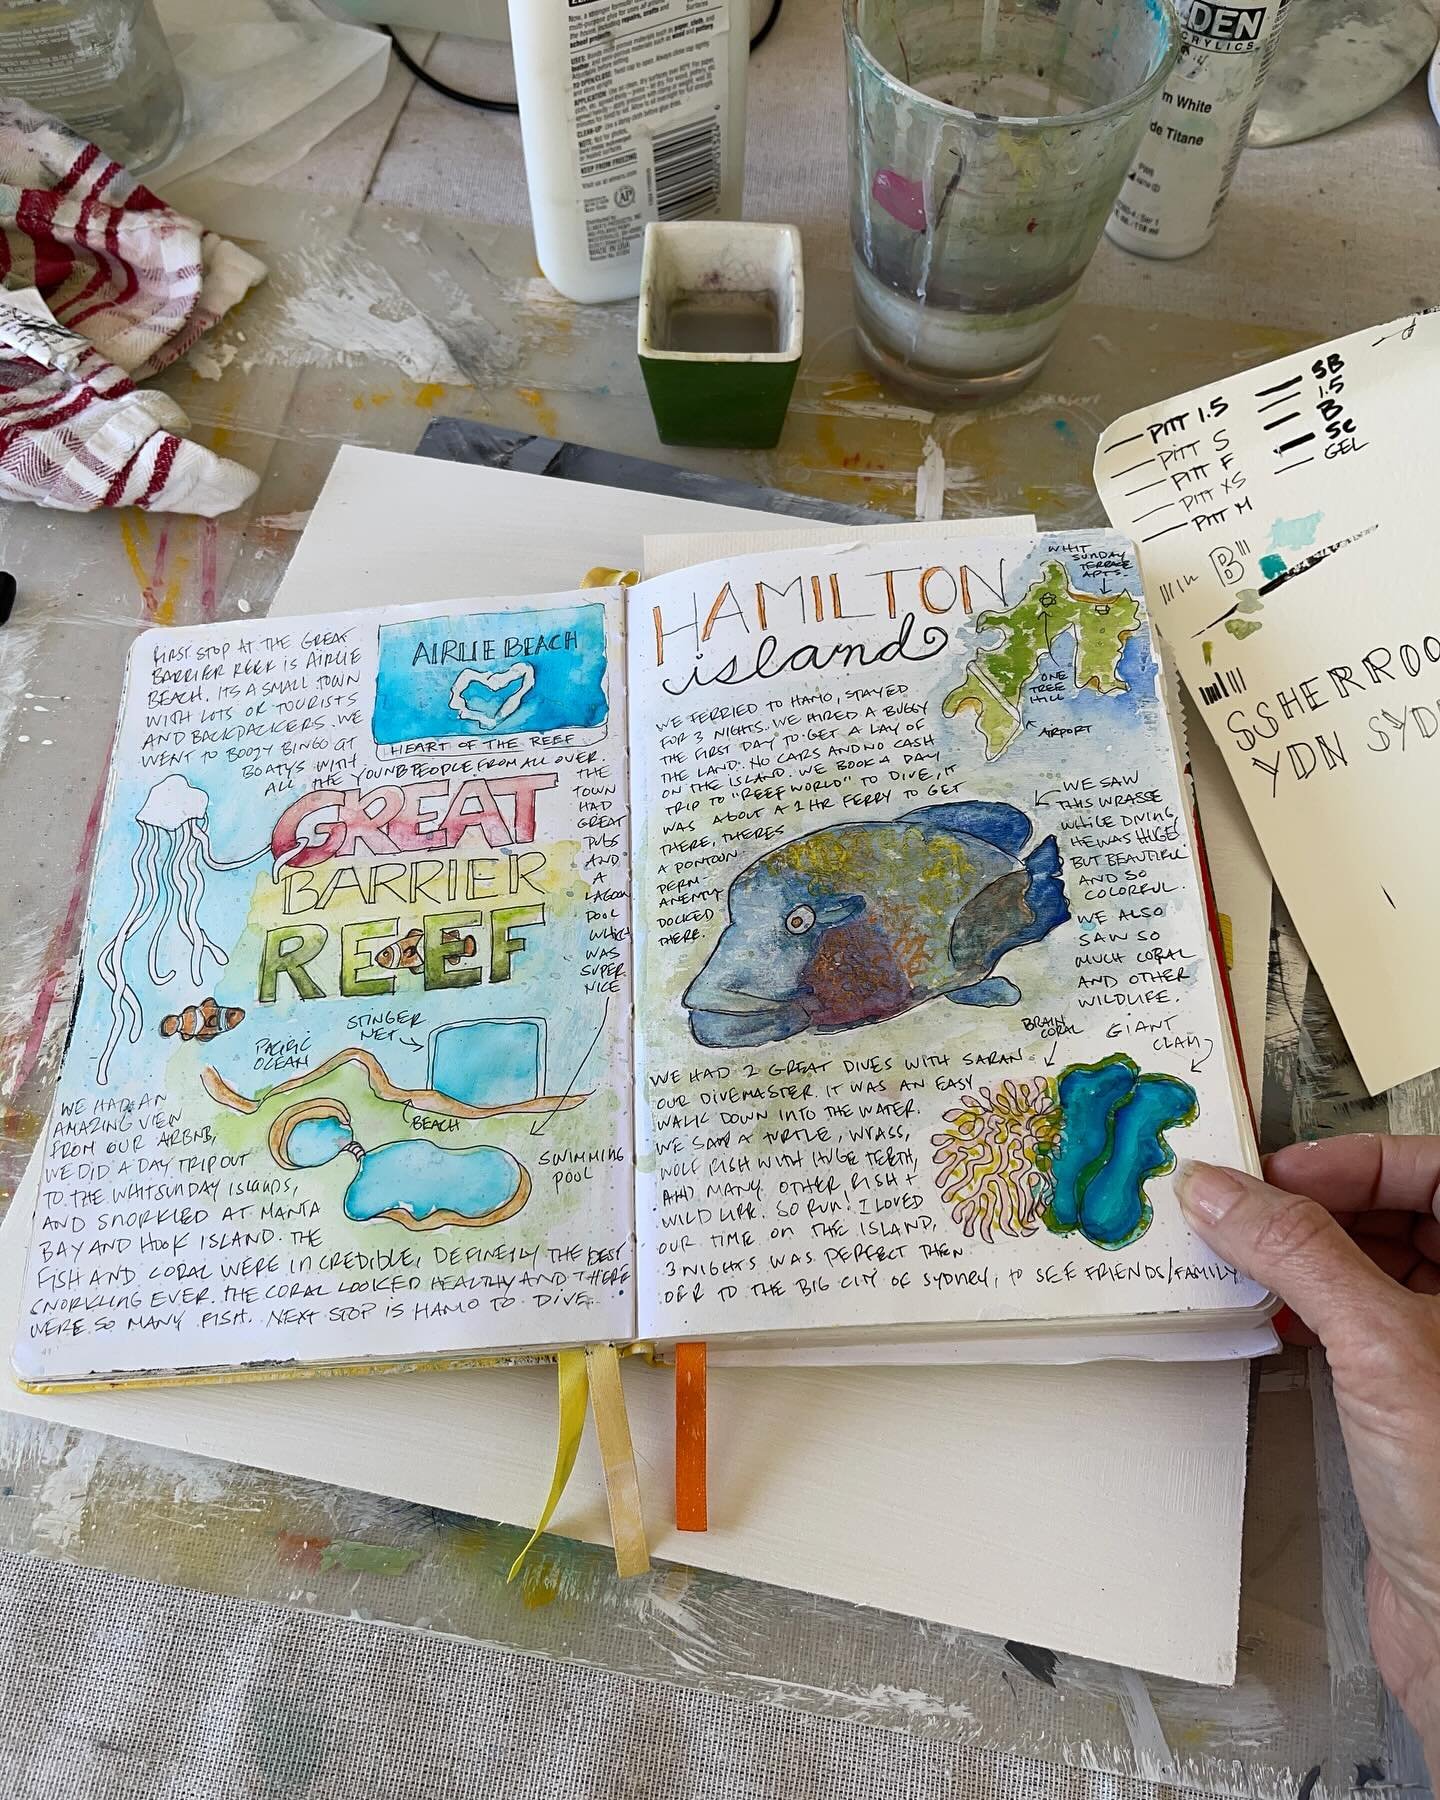 Sketchbook page from the Great Barrier Reef, Airlie Beach and Hamilton Island. Leg 3 of 4. Diving and snorkeling was amazing! Loved our time there!